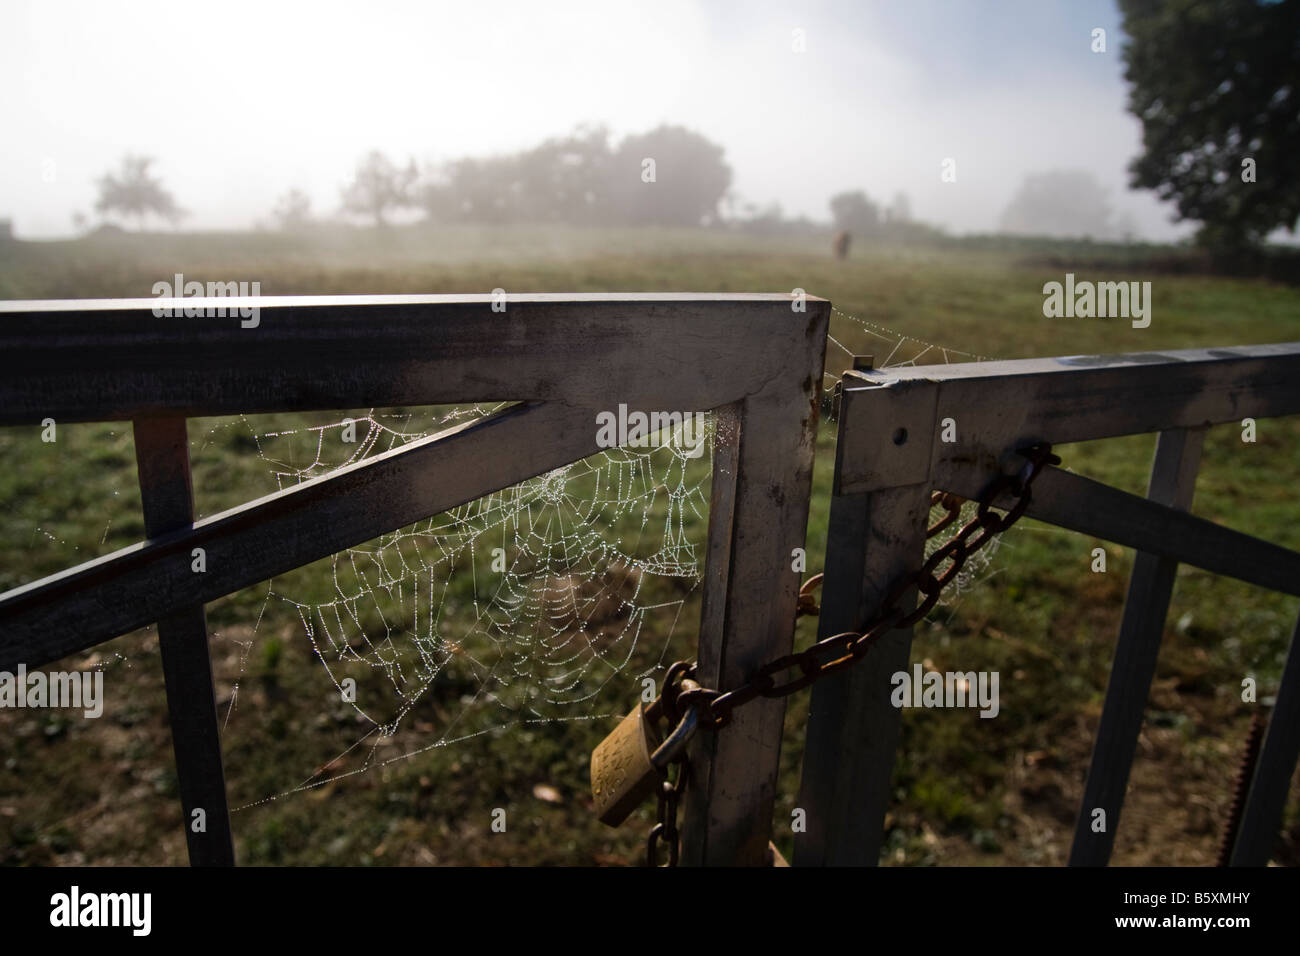 A spider web hangs from a locked metal gate in a field along the Camino de Santiago between Sarria and Portomarin, Galicia, Spain. Stock Photo